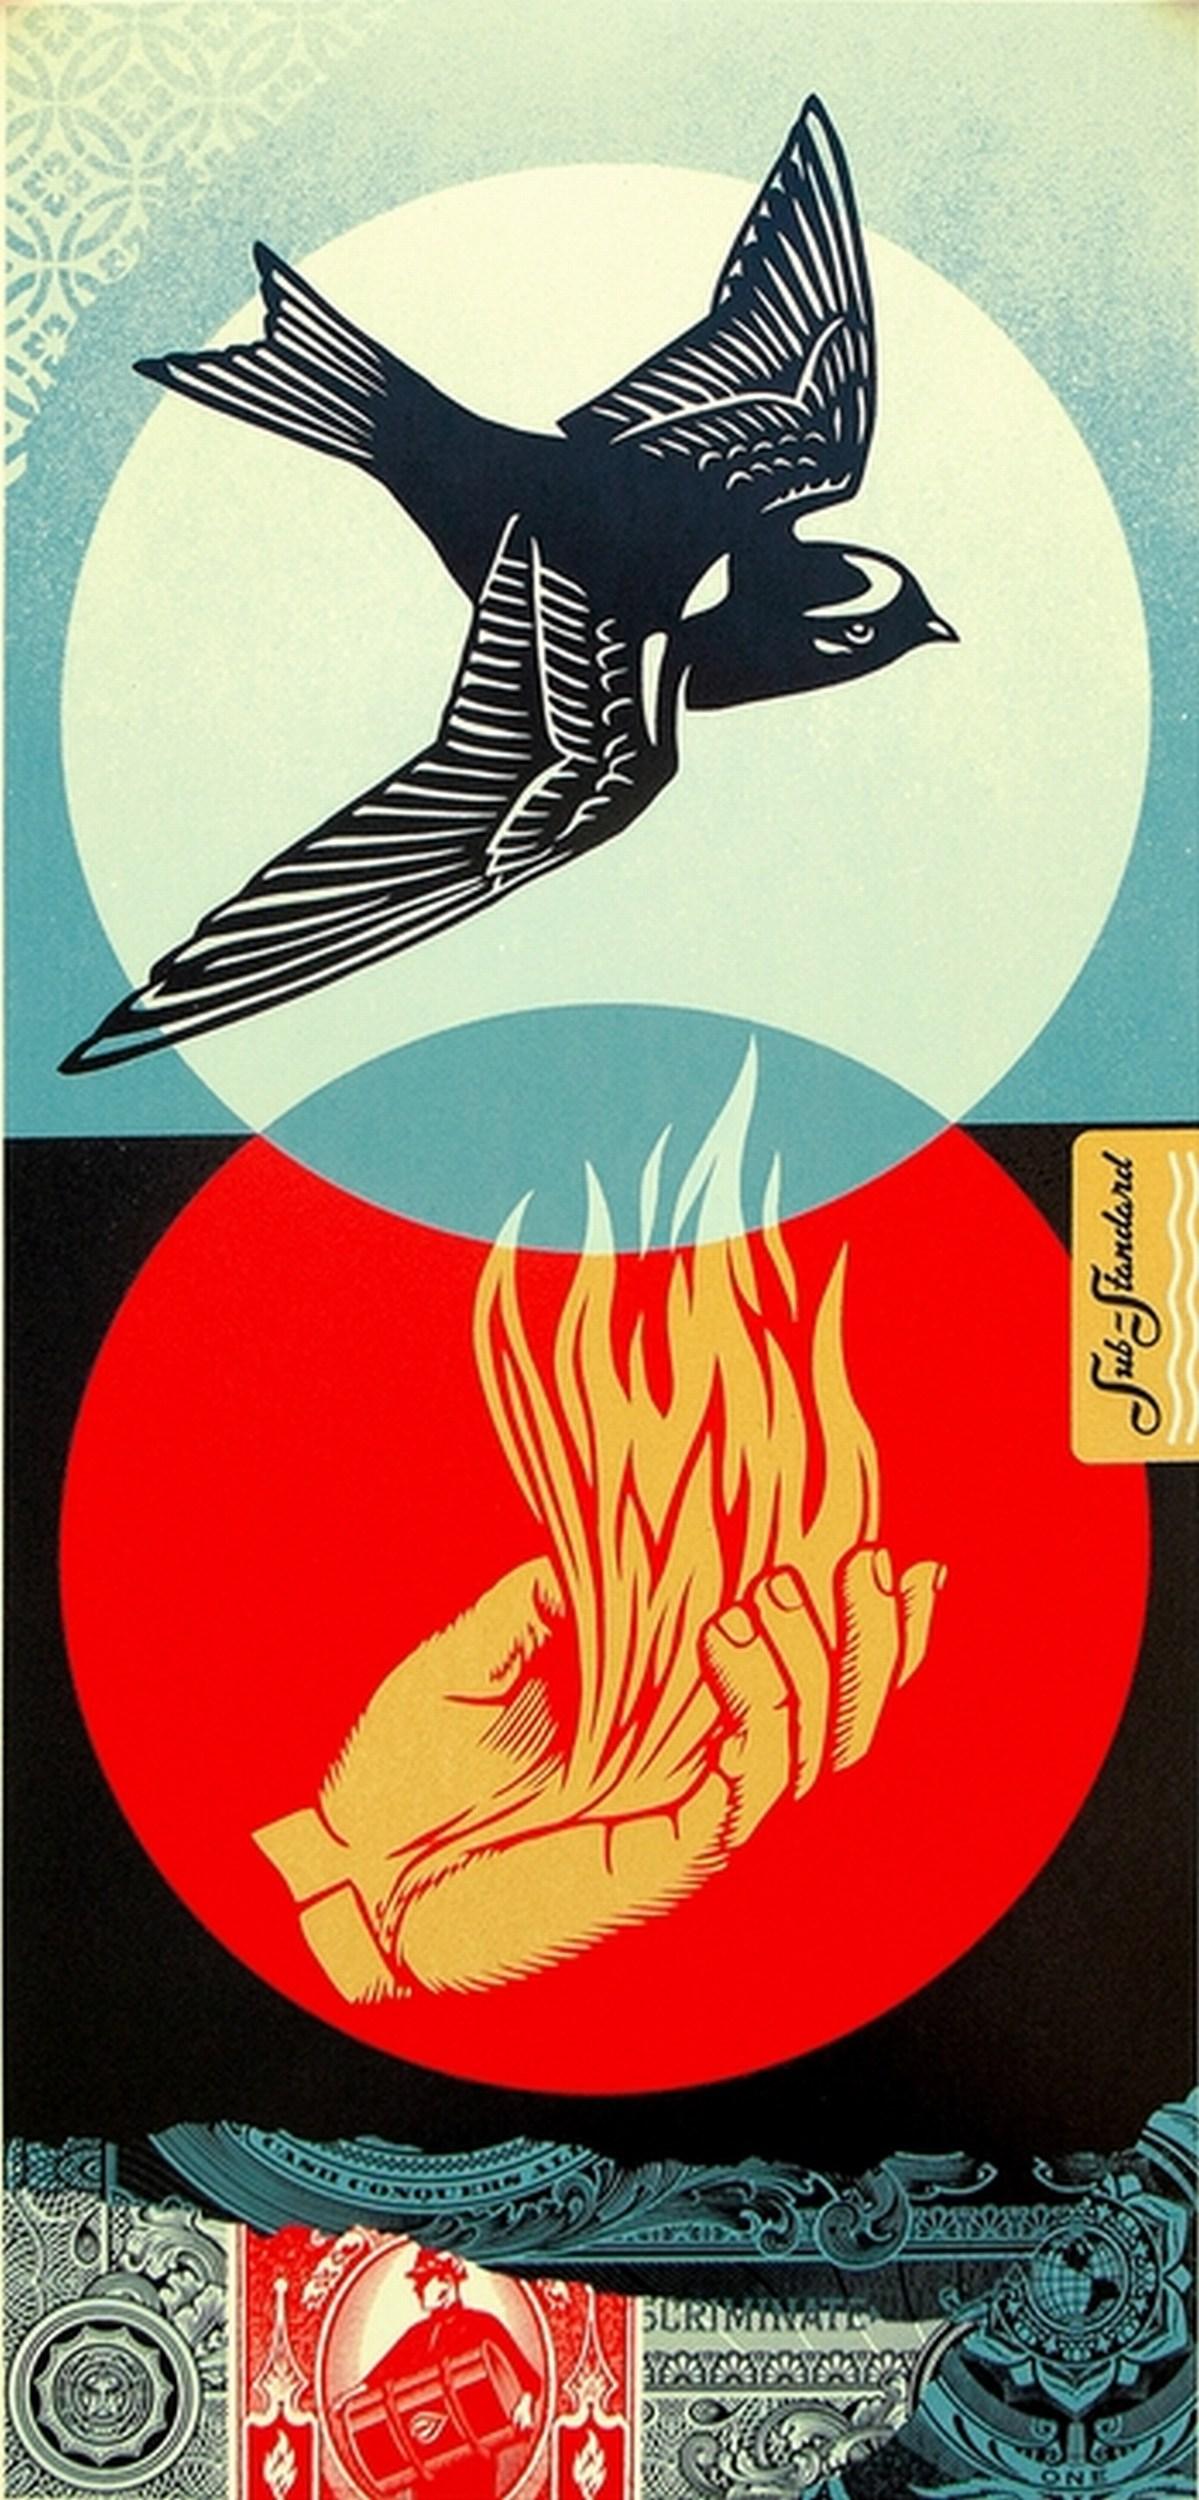 Sub-Standard (Corporate Greed, Fossil Fuels, Collapsing Ecosystems) - Print by Shepard Fairey